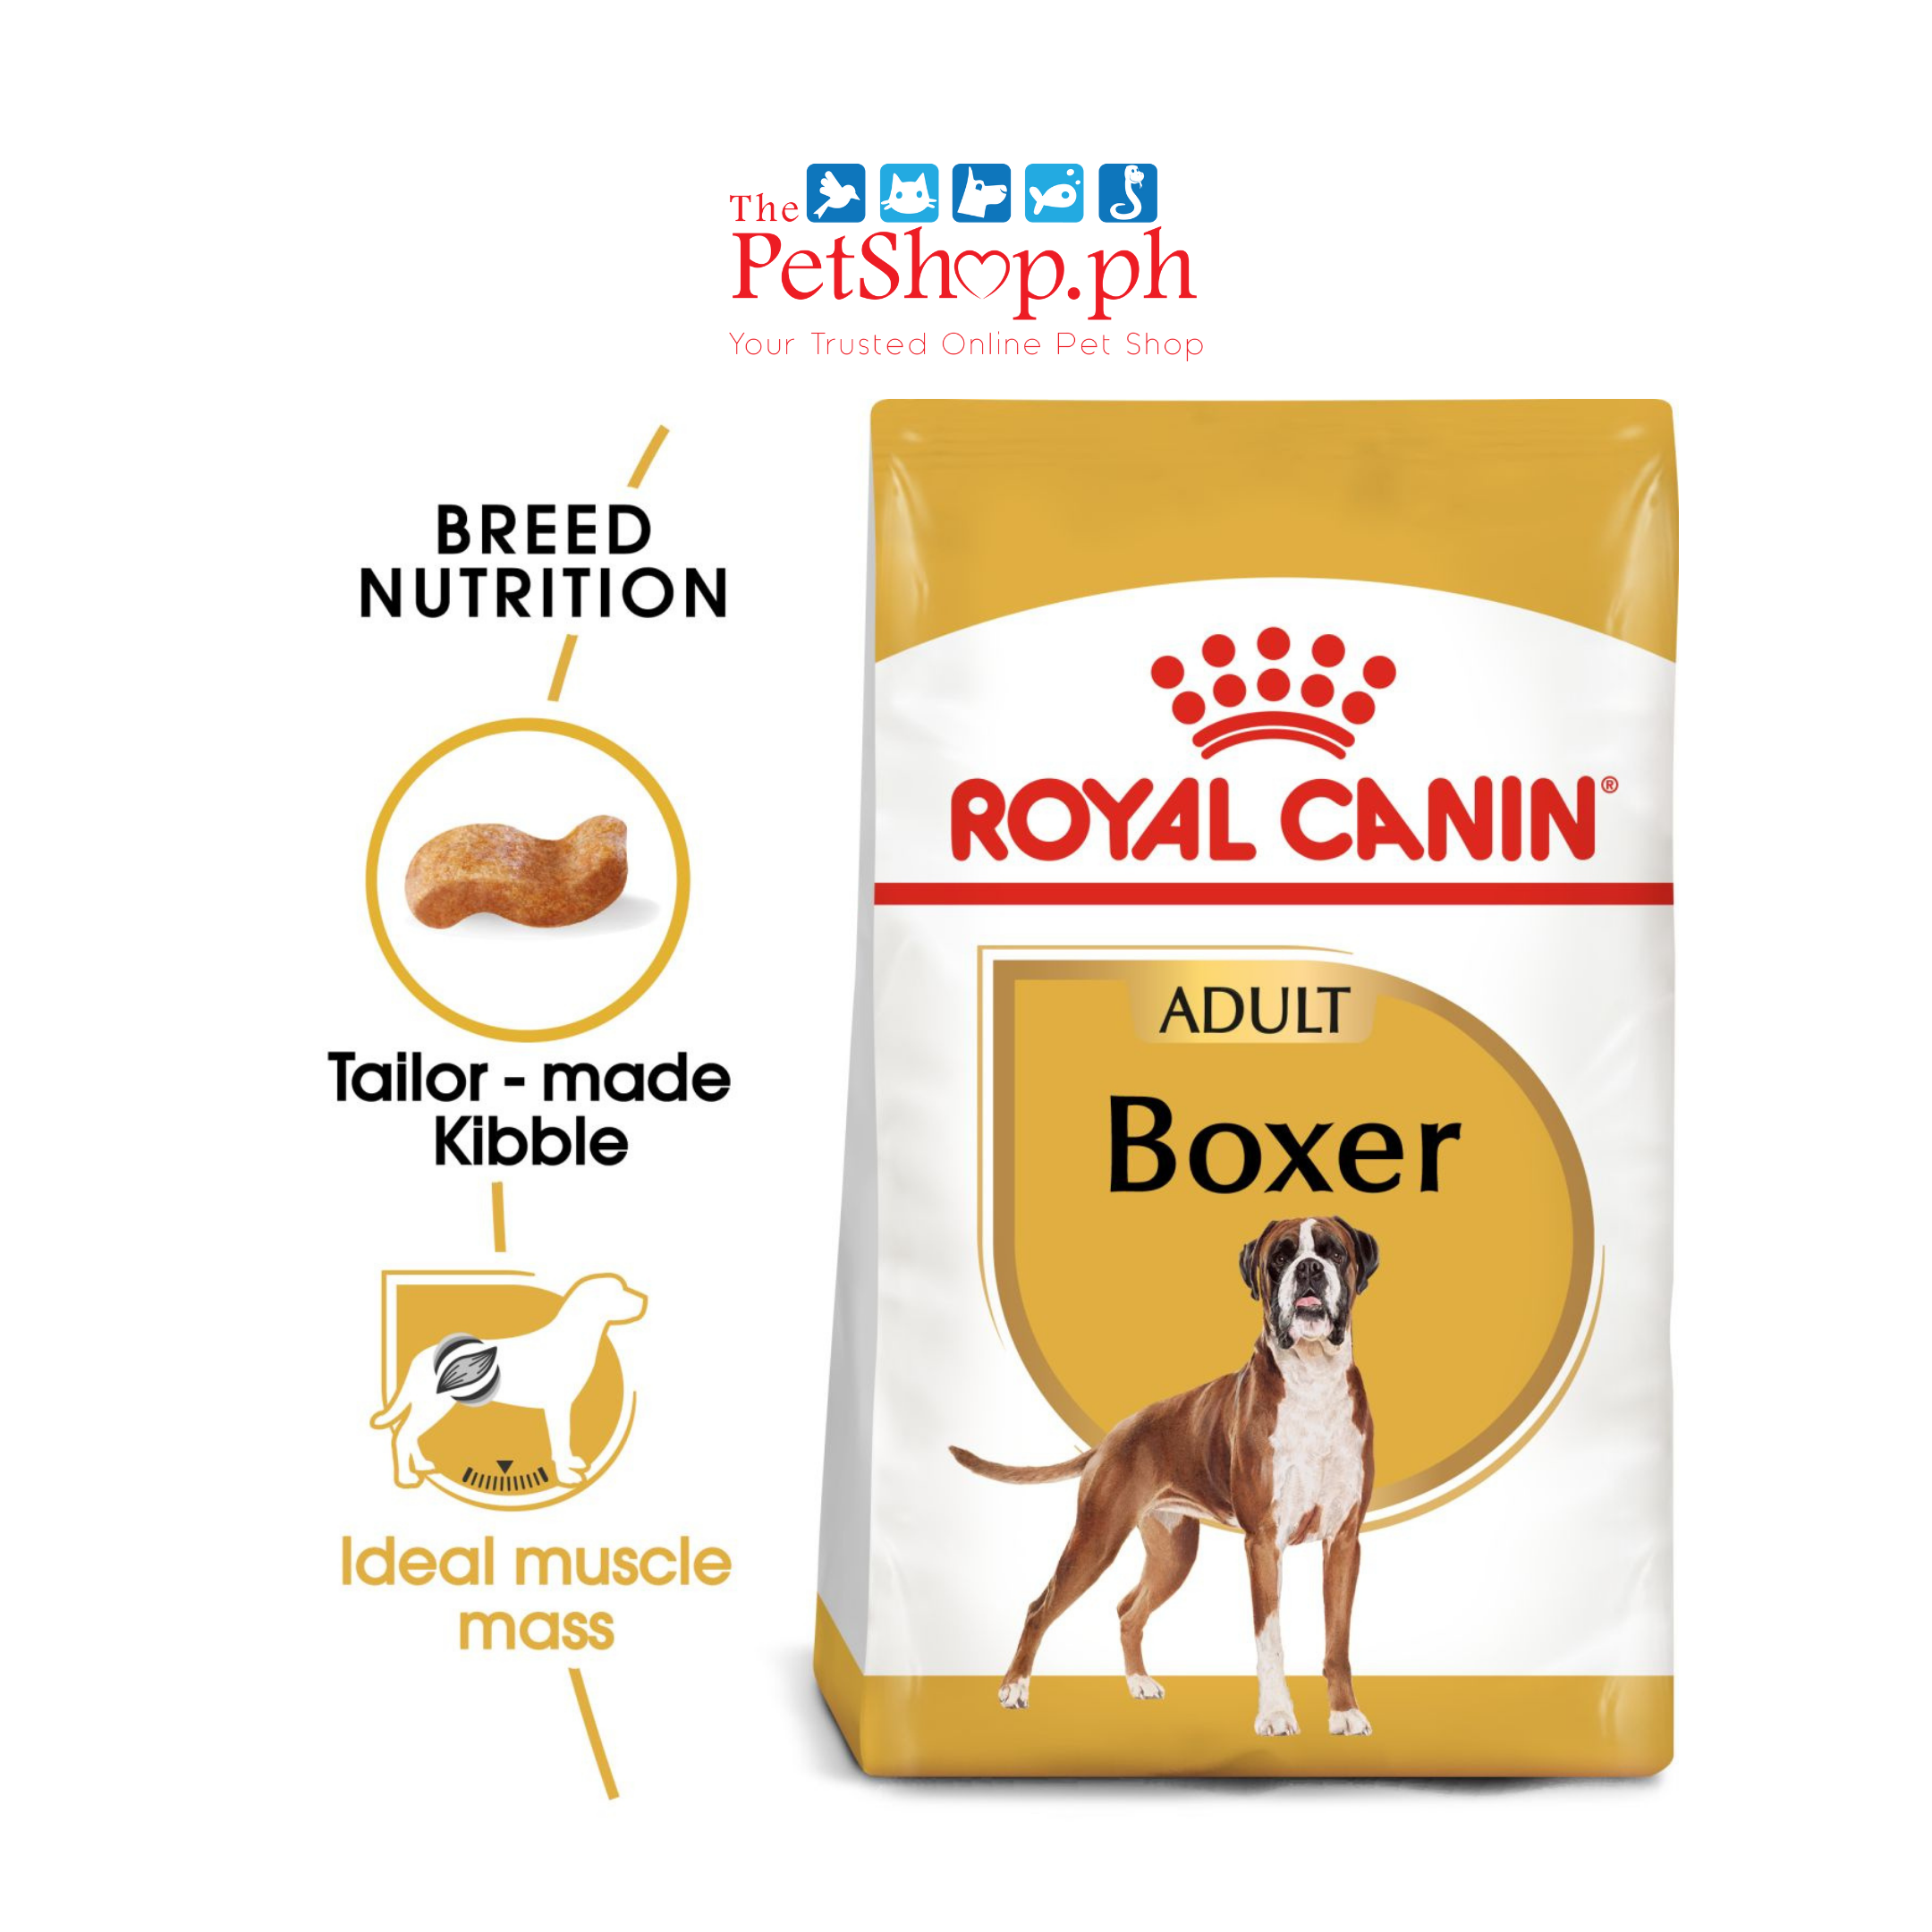 Royal Canin Boxer 3kg Adult Dry Dog Food - Breed Health Nutrition